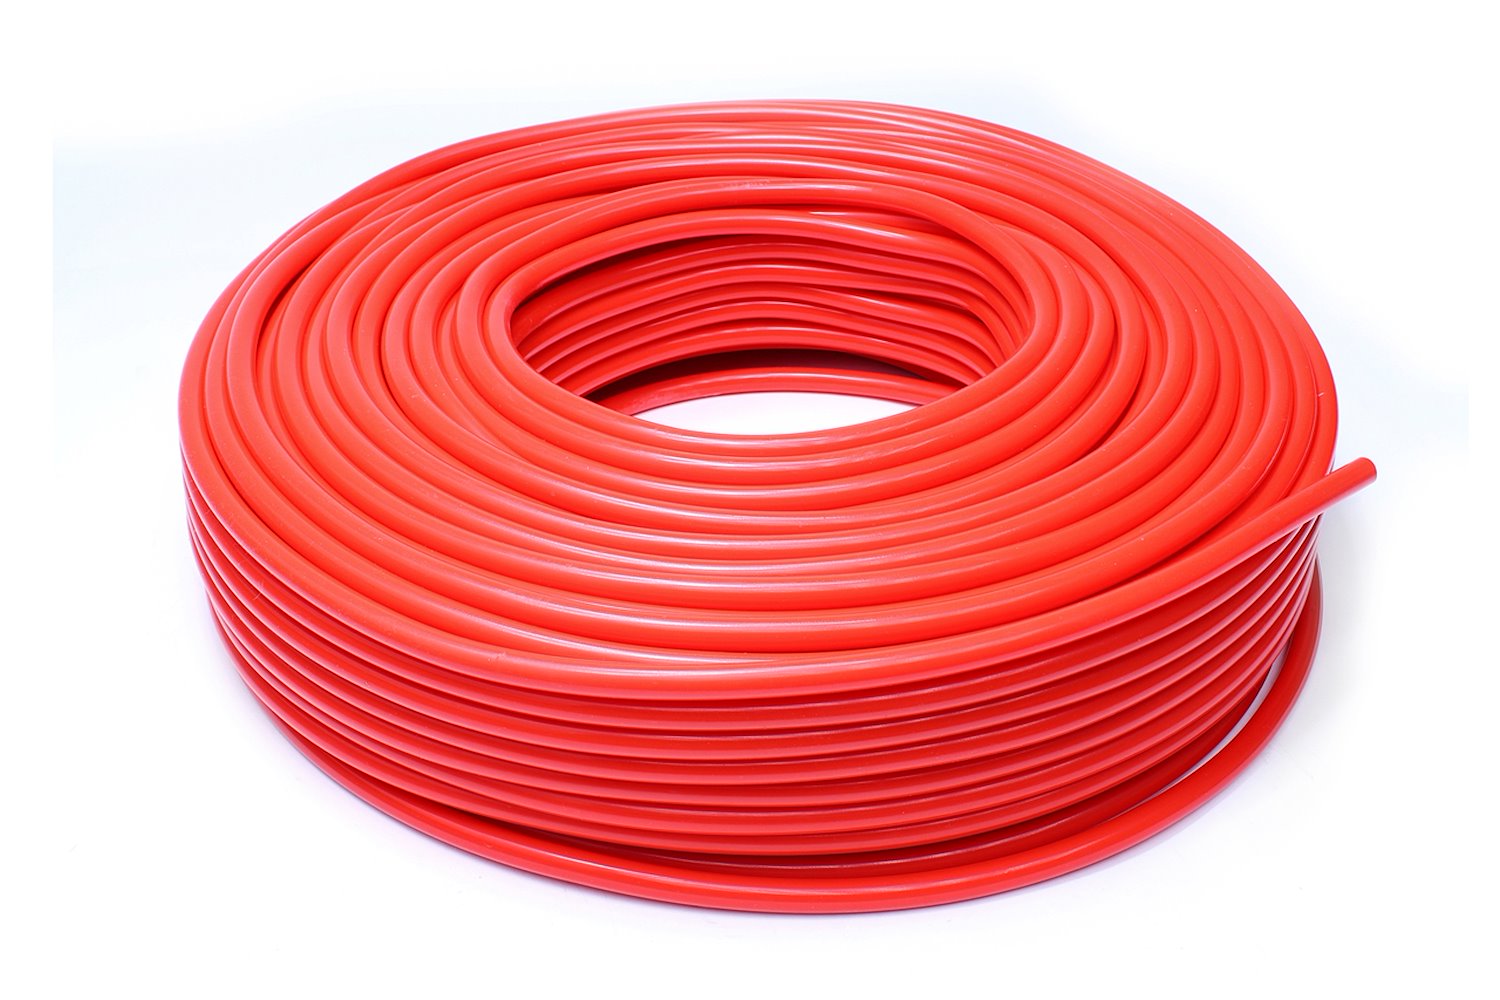 HTSVH7-REDx50 High-Temperature Silicone Vacuum Hose Tubing, 9/32 in. ID, 50 ft. Roll, Red